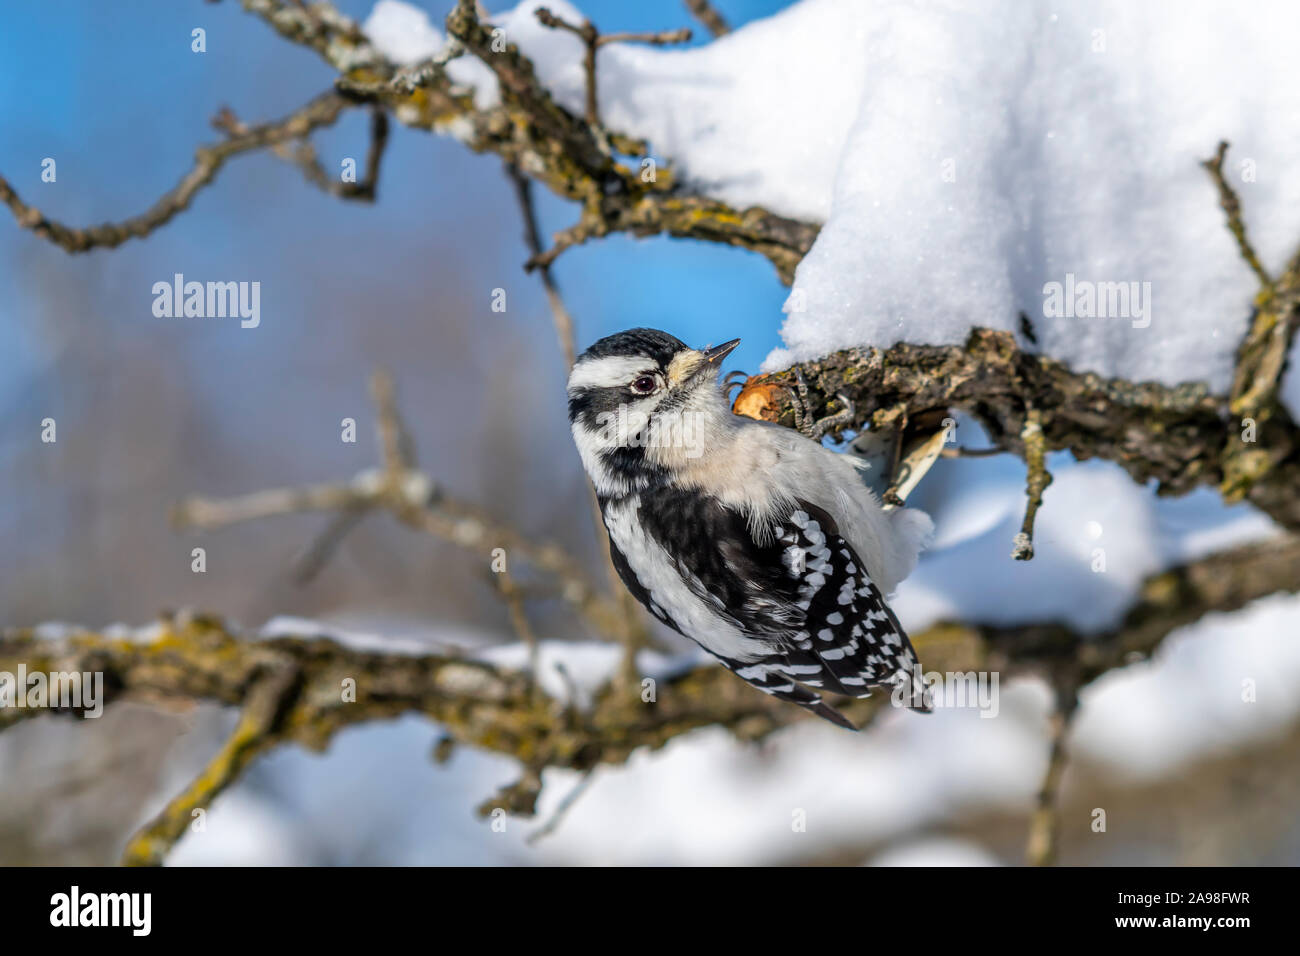 A female  Downy Woodpecker (Dryobates pubescens) on a snow covered branch in winter. Stock Photo